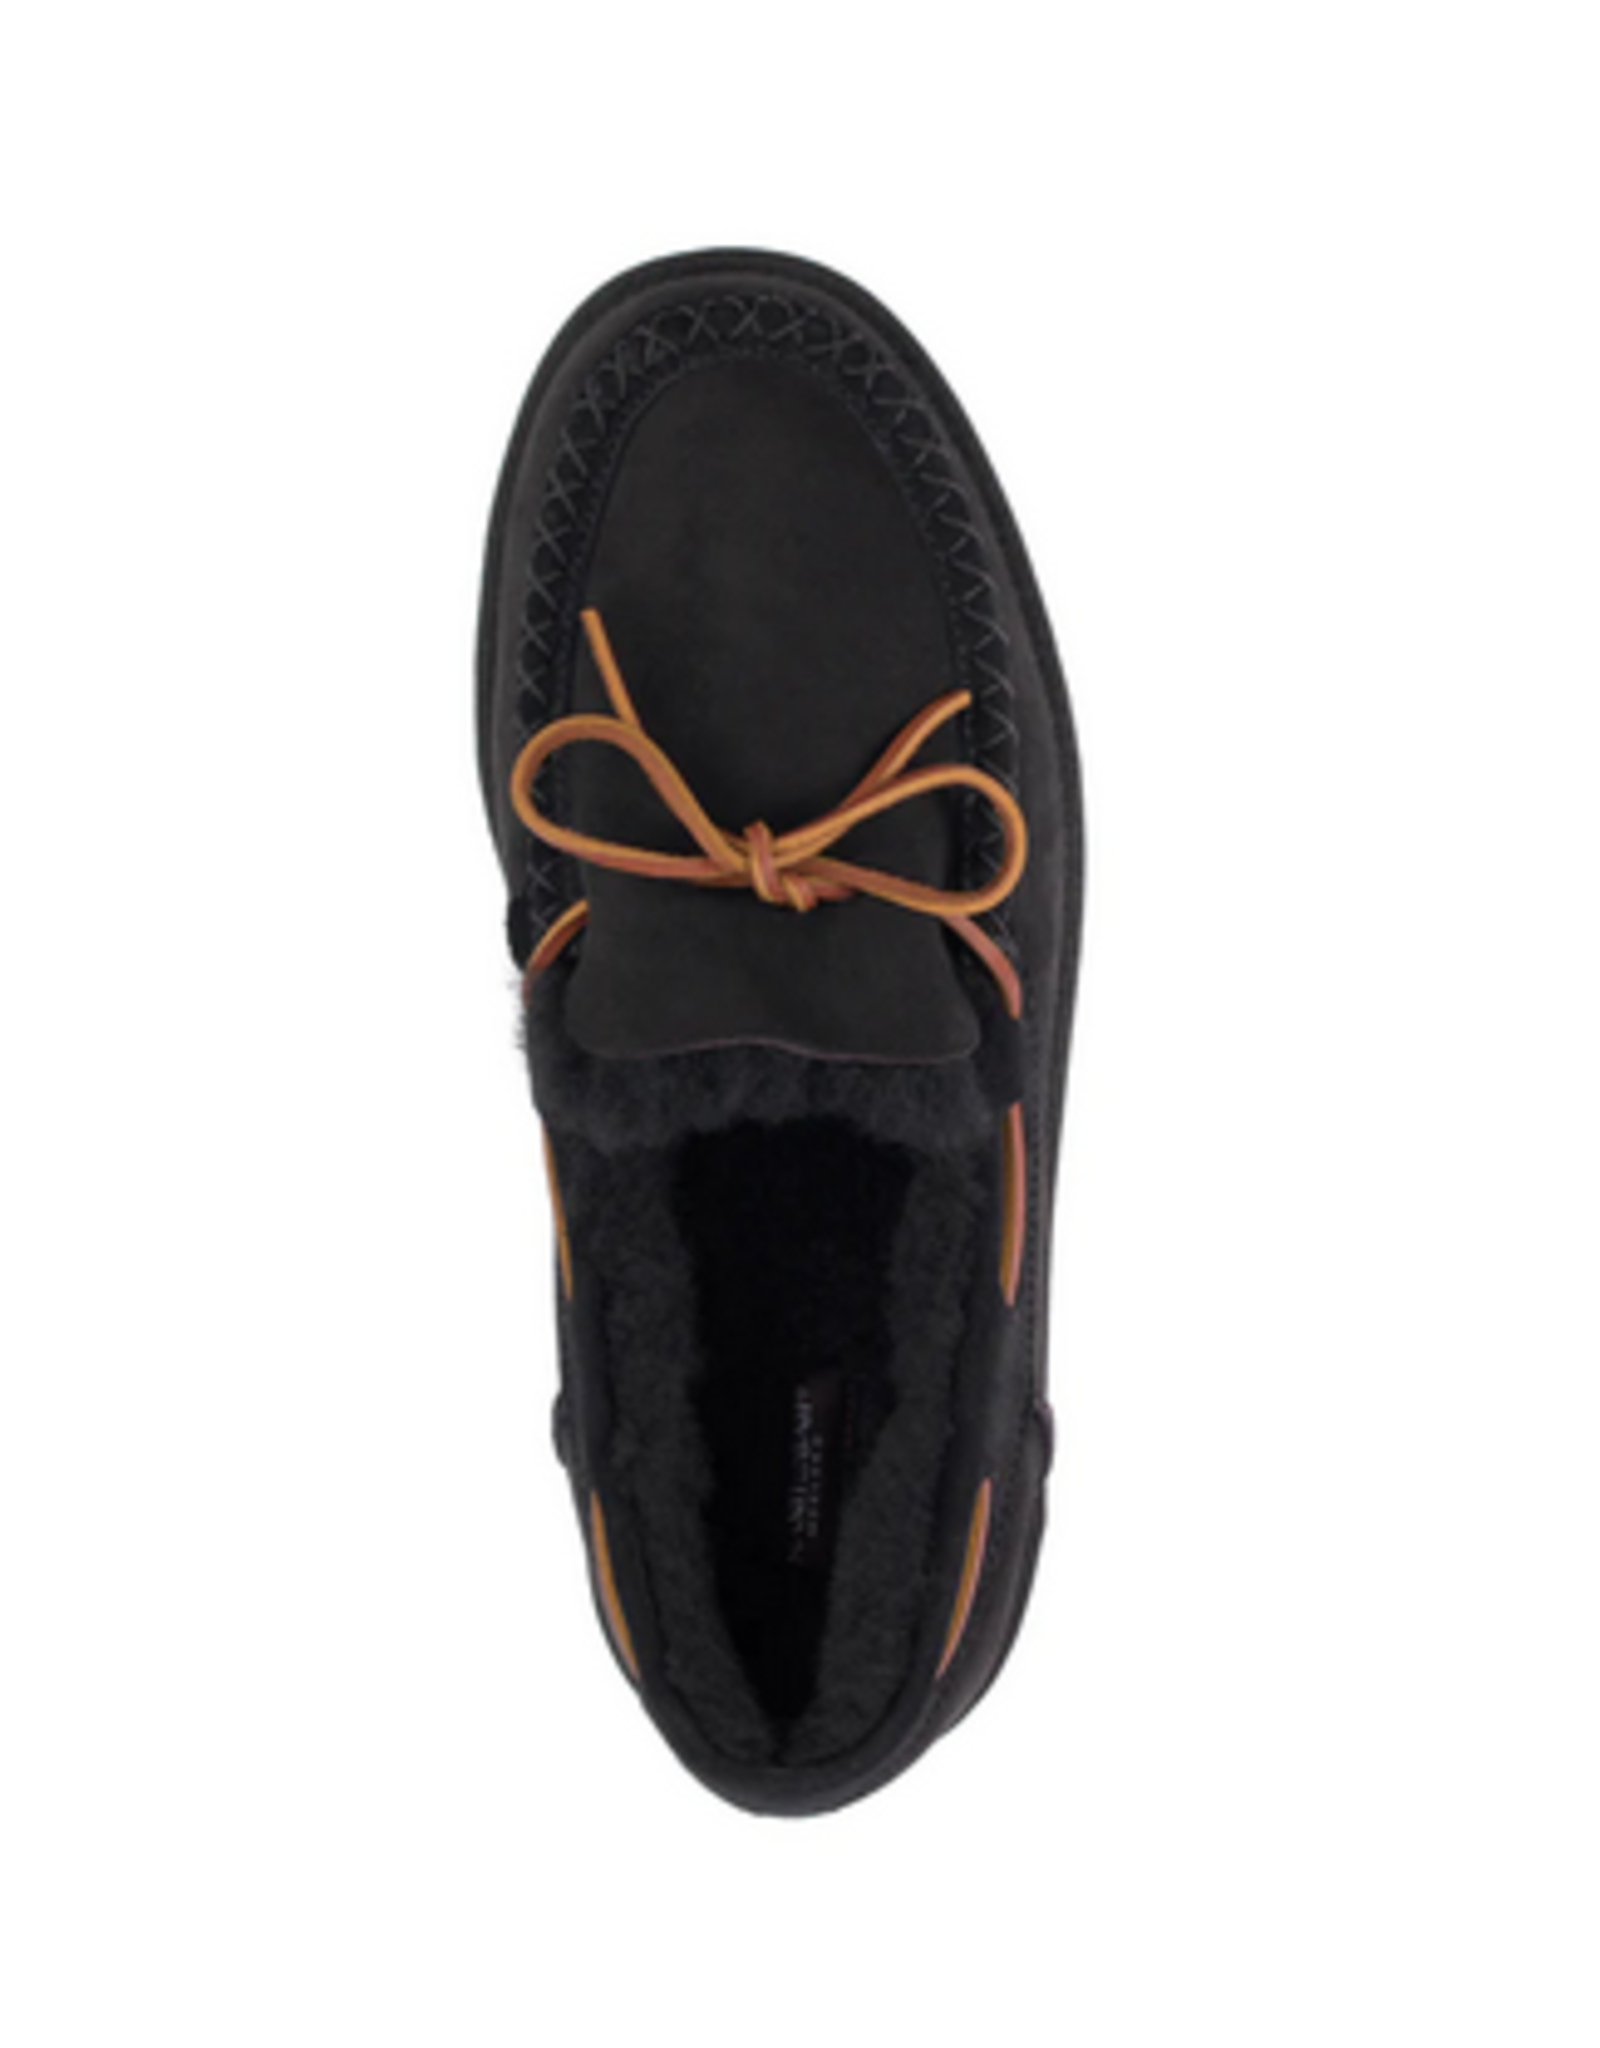 Lined Cabin Loafer with Sole Black - 806M